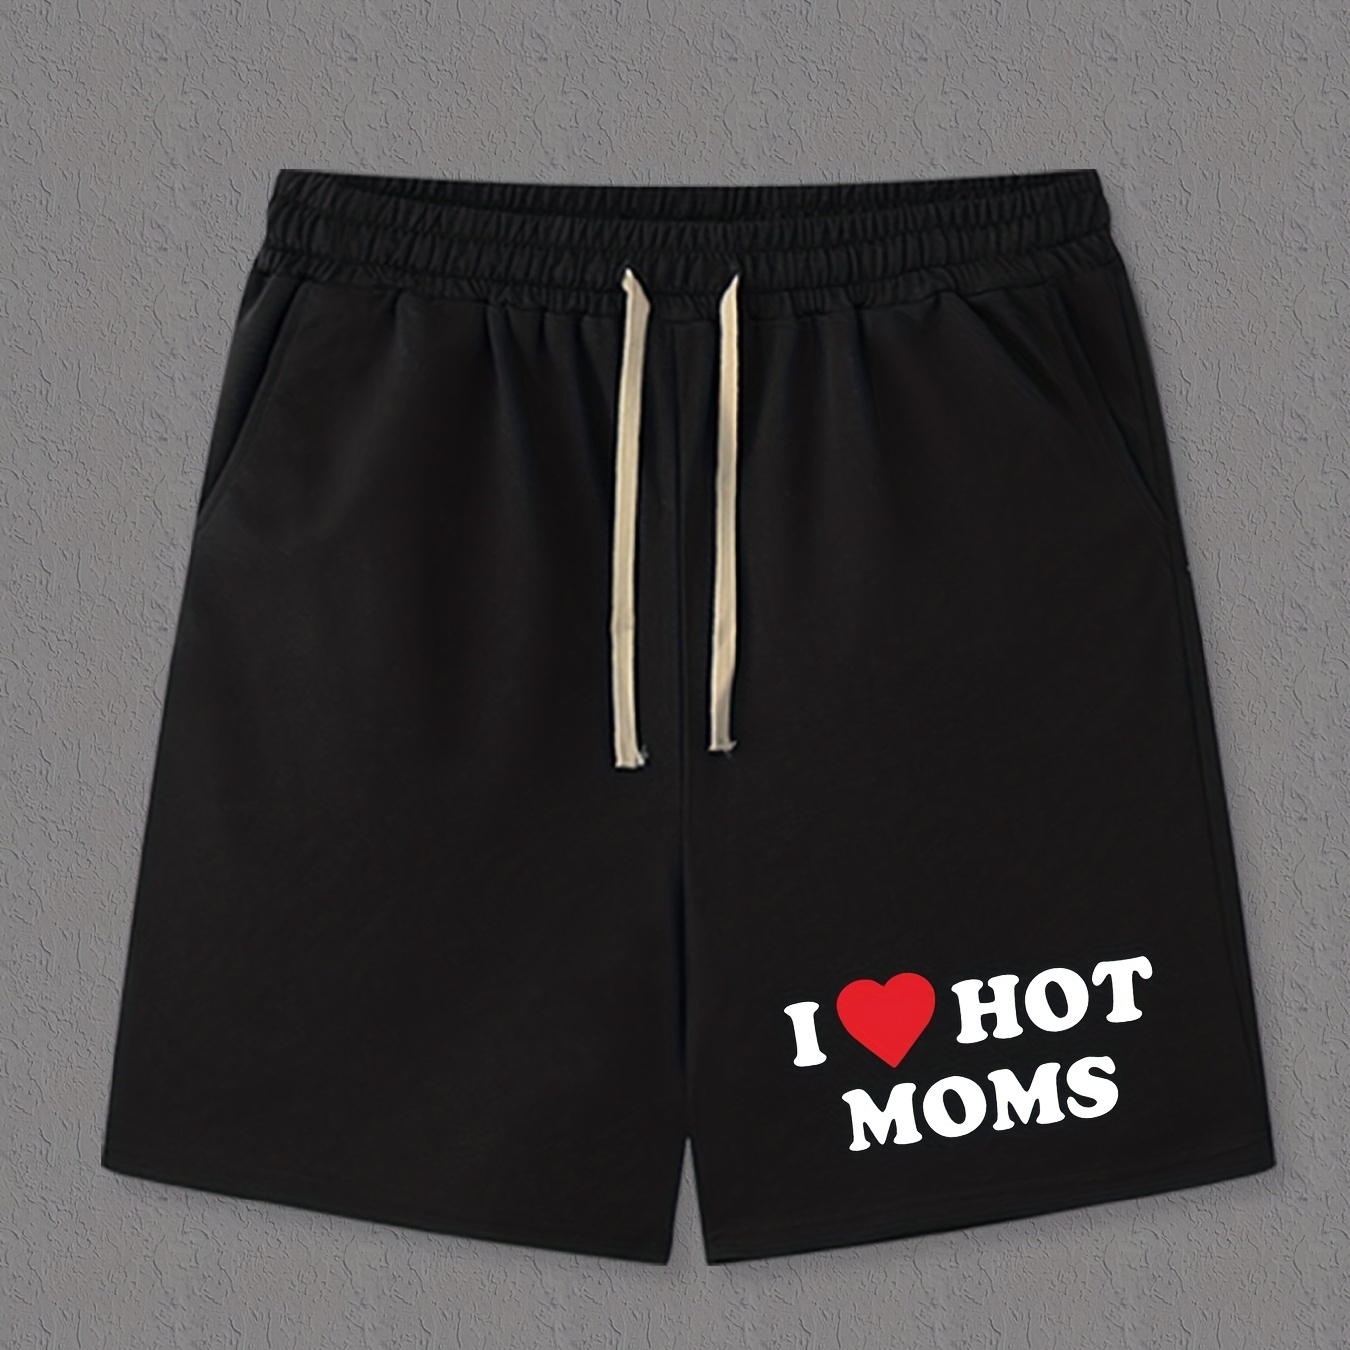 

Hot Moms Print, Men's Trendy Comfy Shorts, Casual Slightly Stretch Breathable Shorts For Outdoor